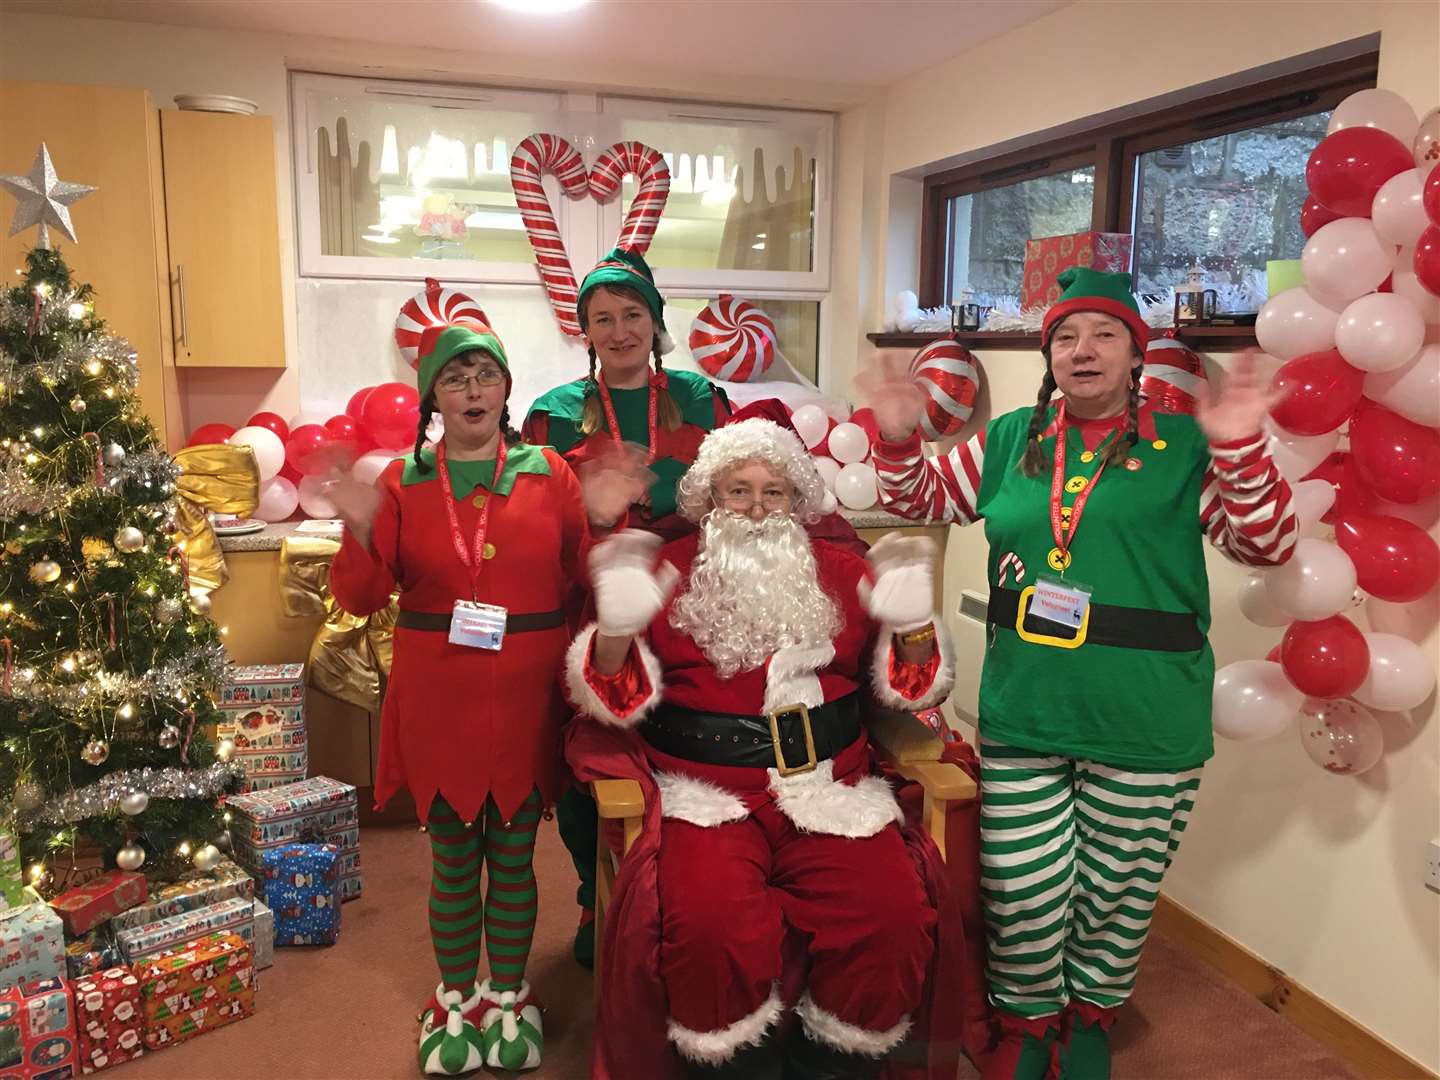 Santa was helped by a team of three elves.